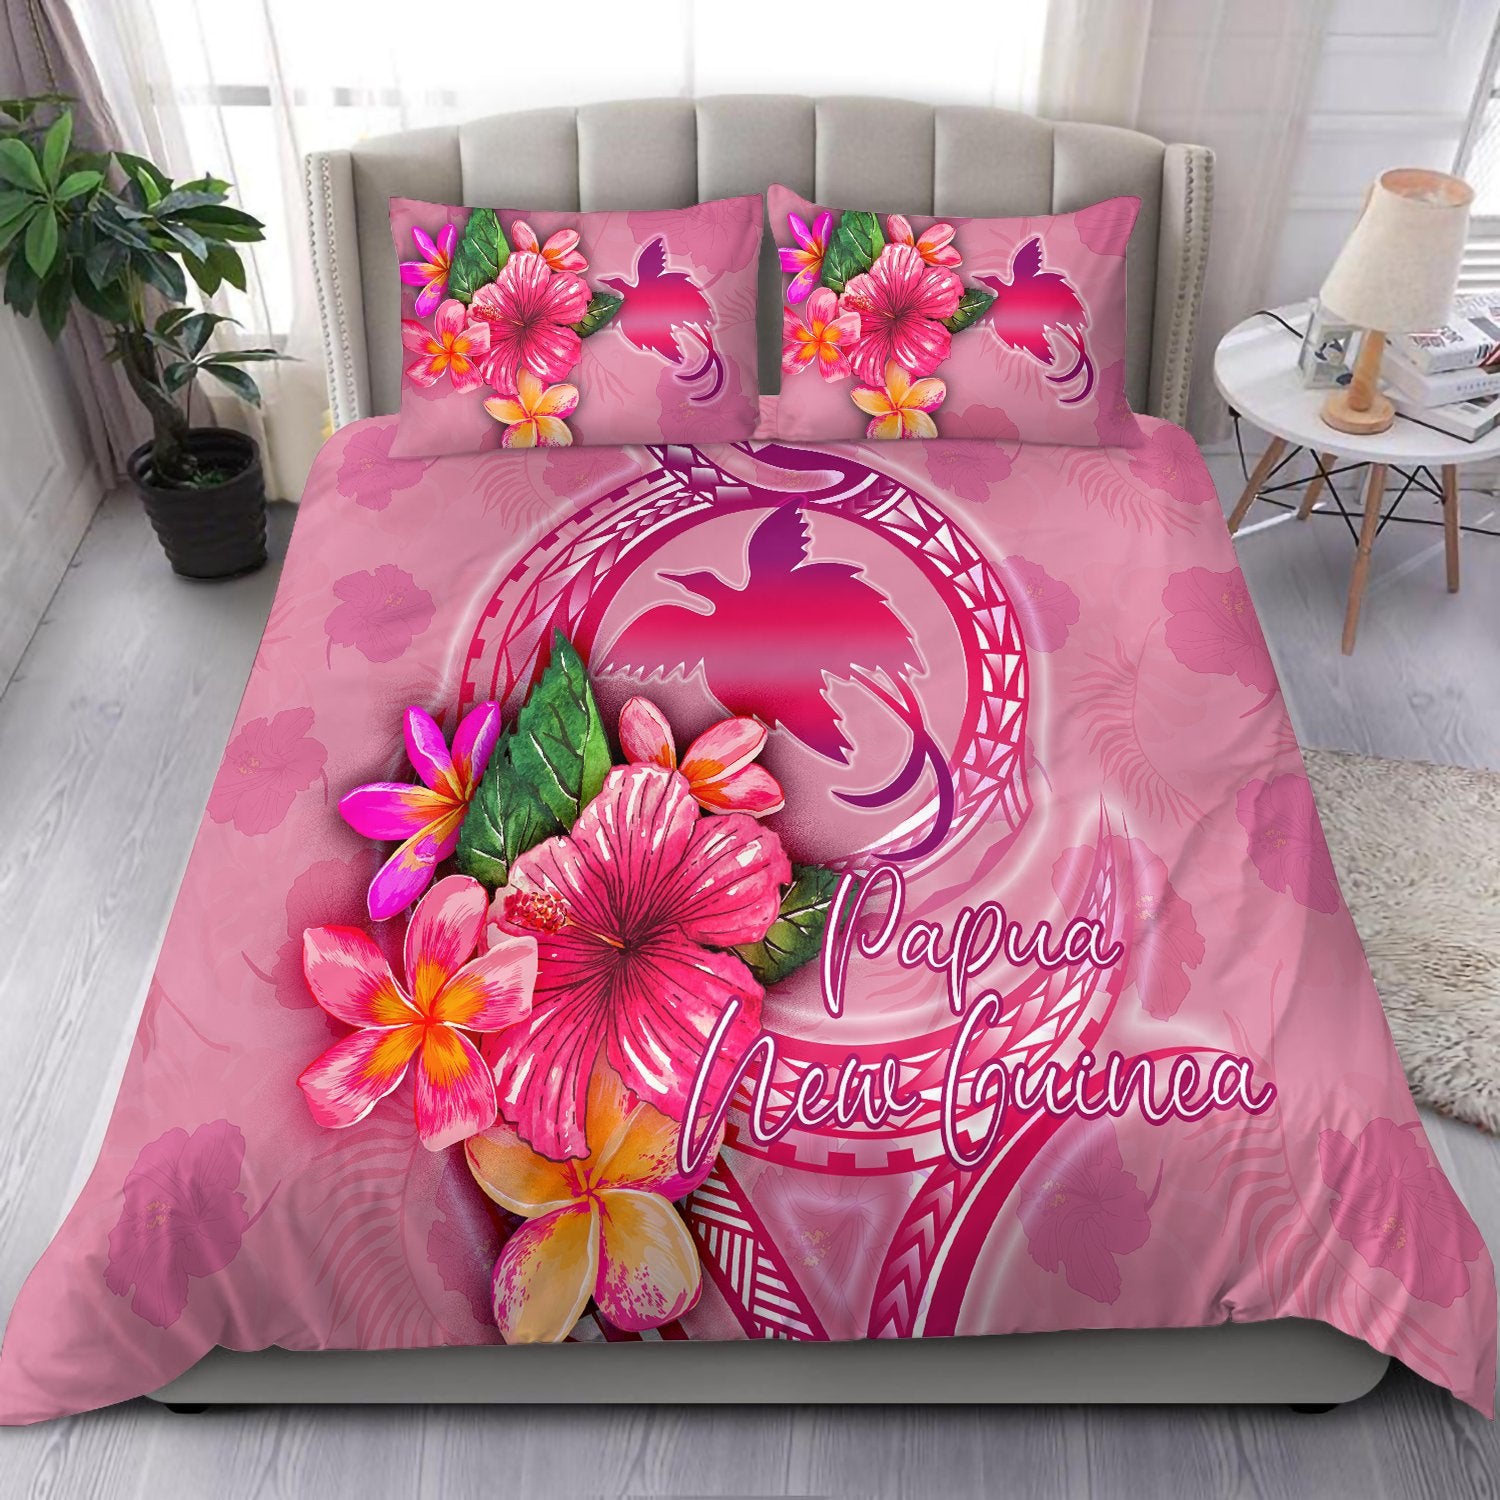 Papua New Guinea Polynesian Bedding Set - Floral With Seal Pink pink - Polynesian Pride